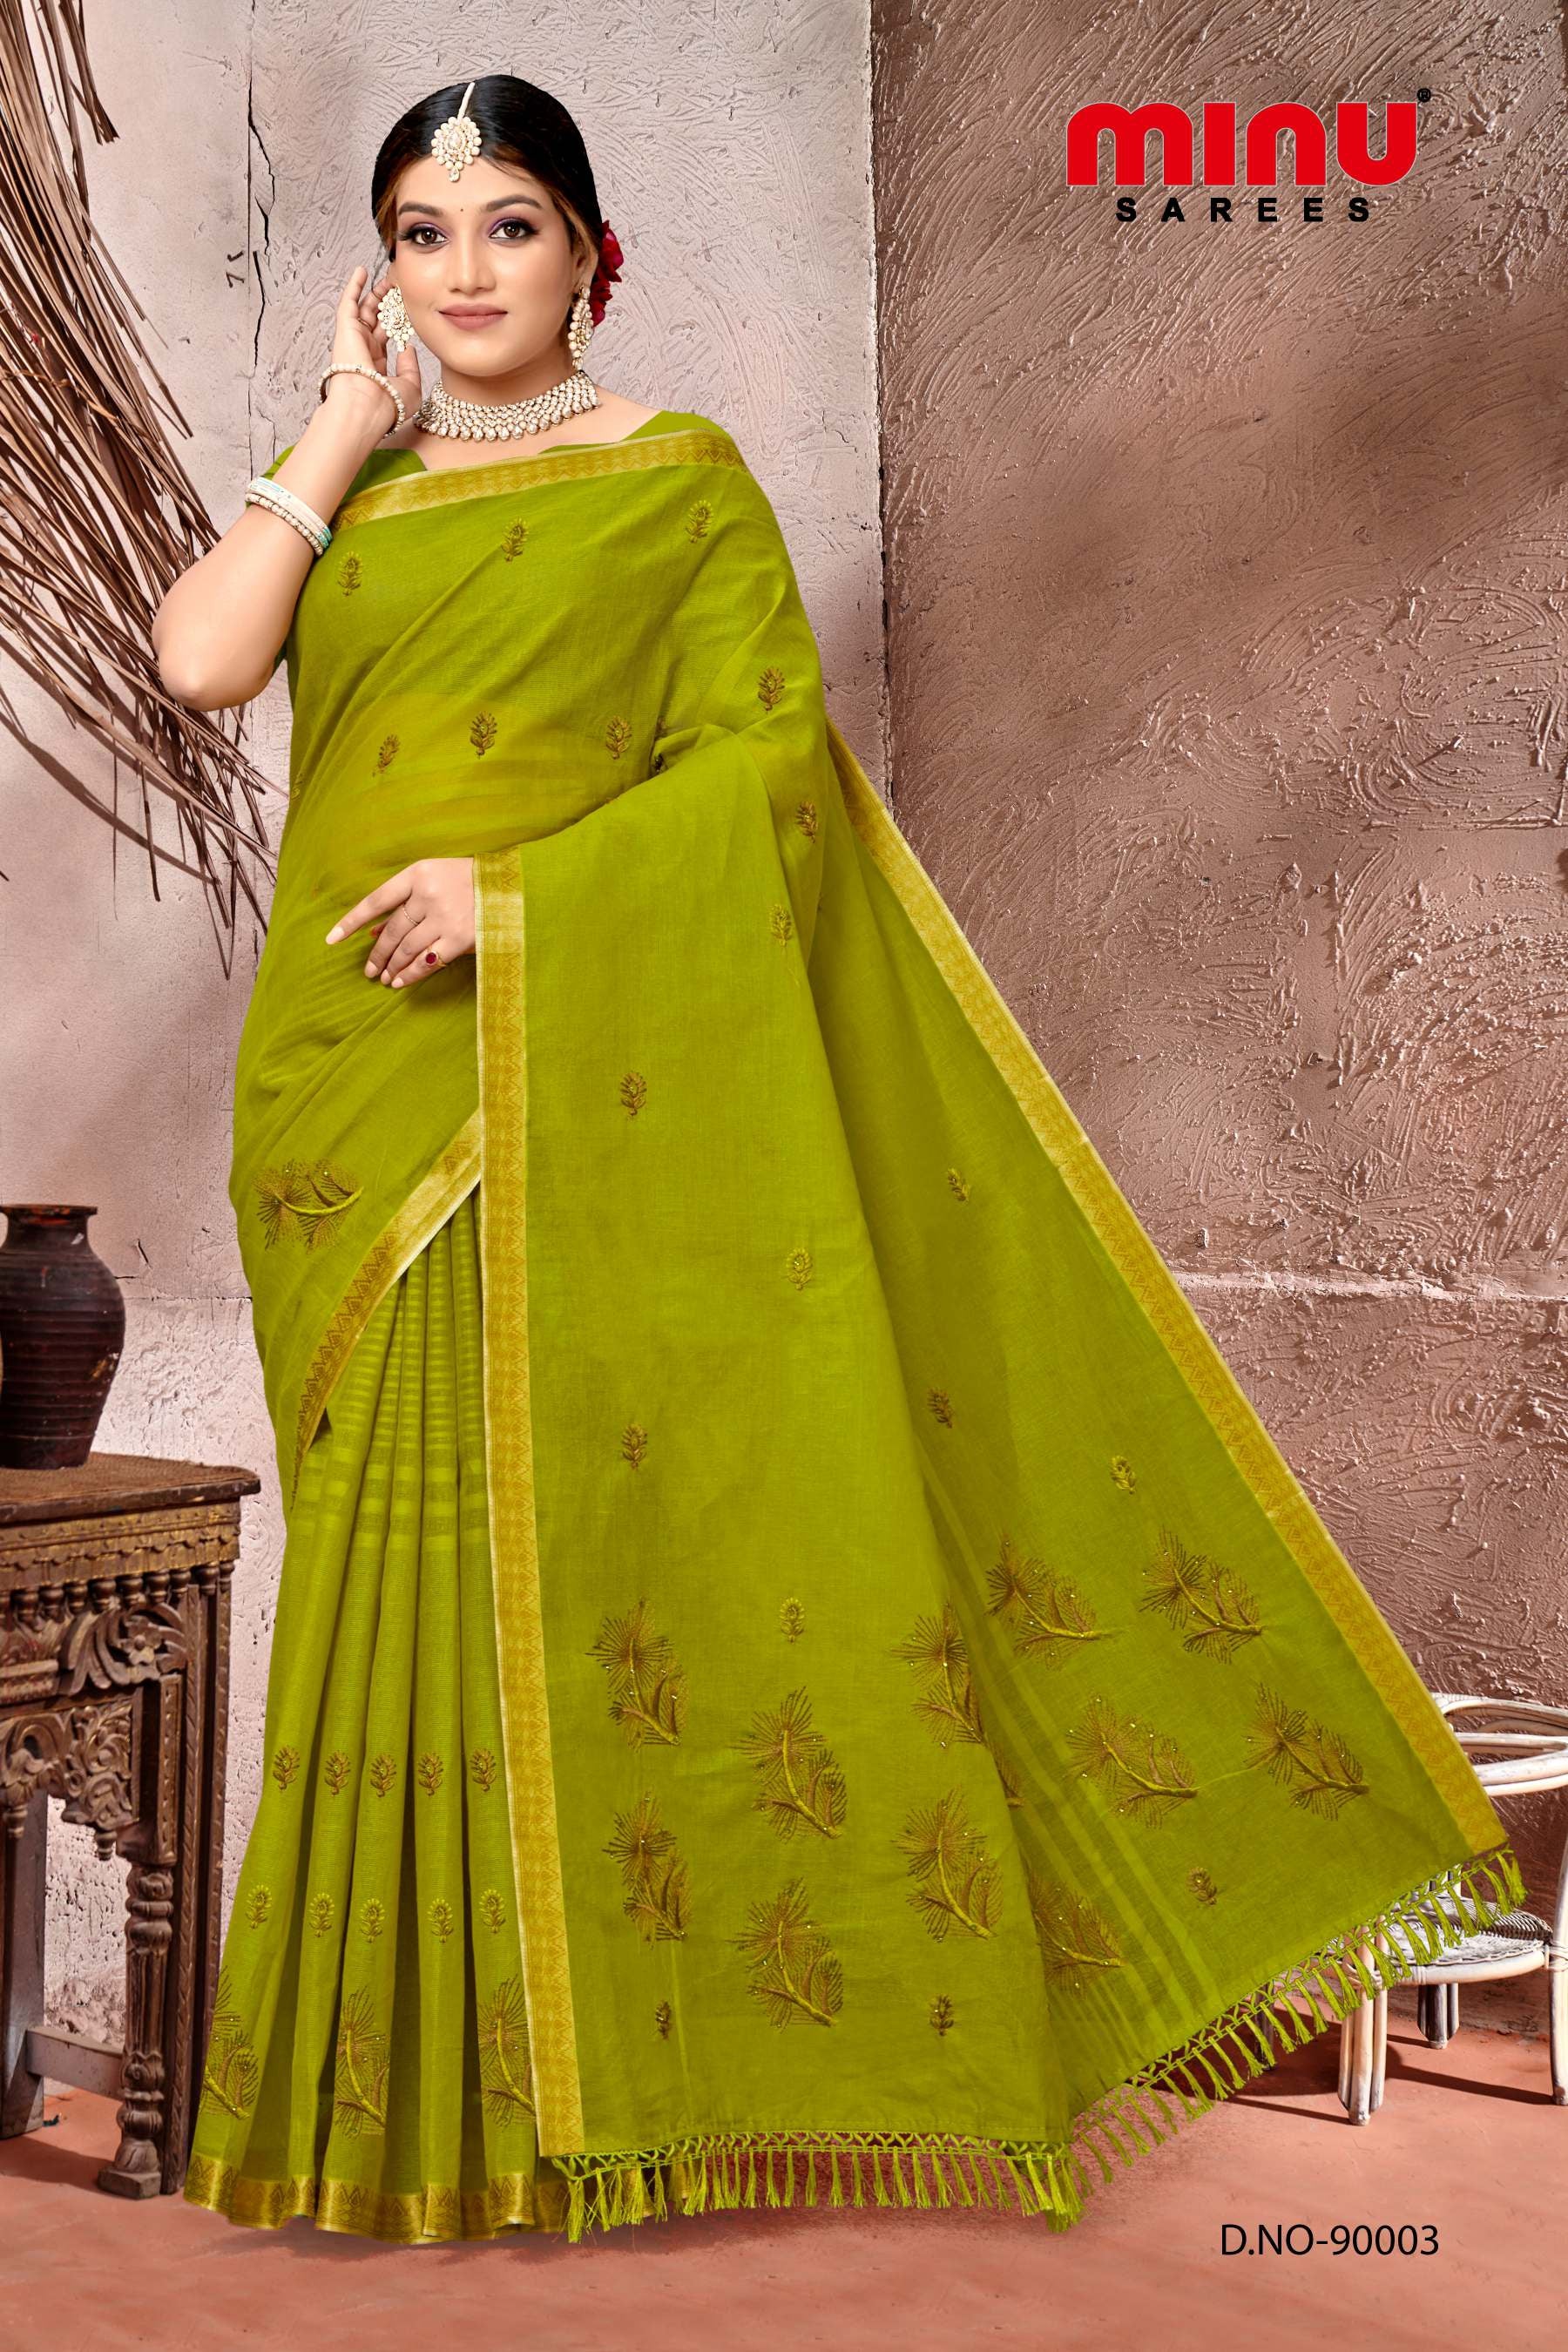 color printed designer embroidered saree wearing woman